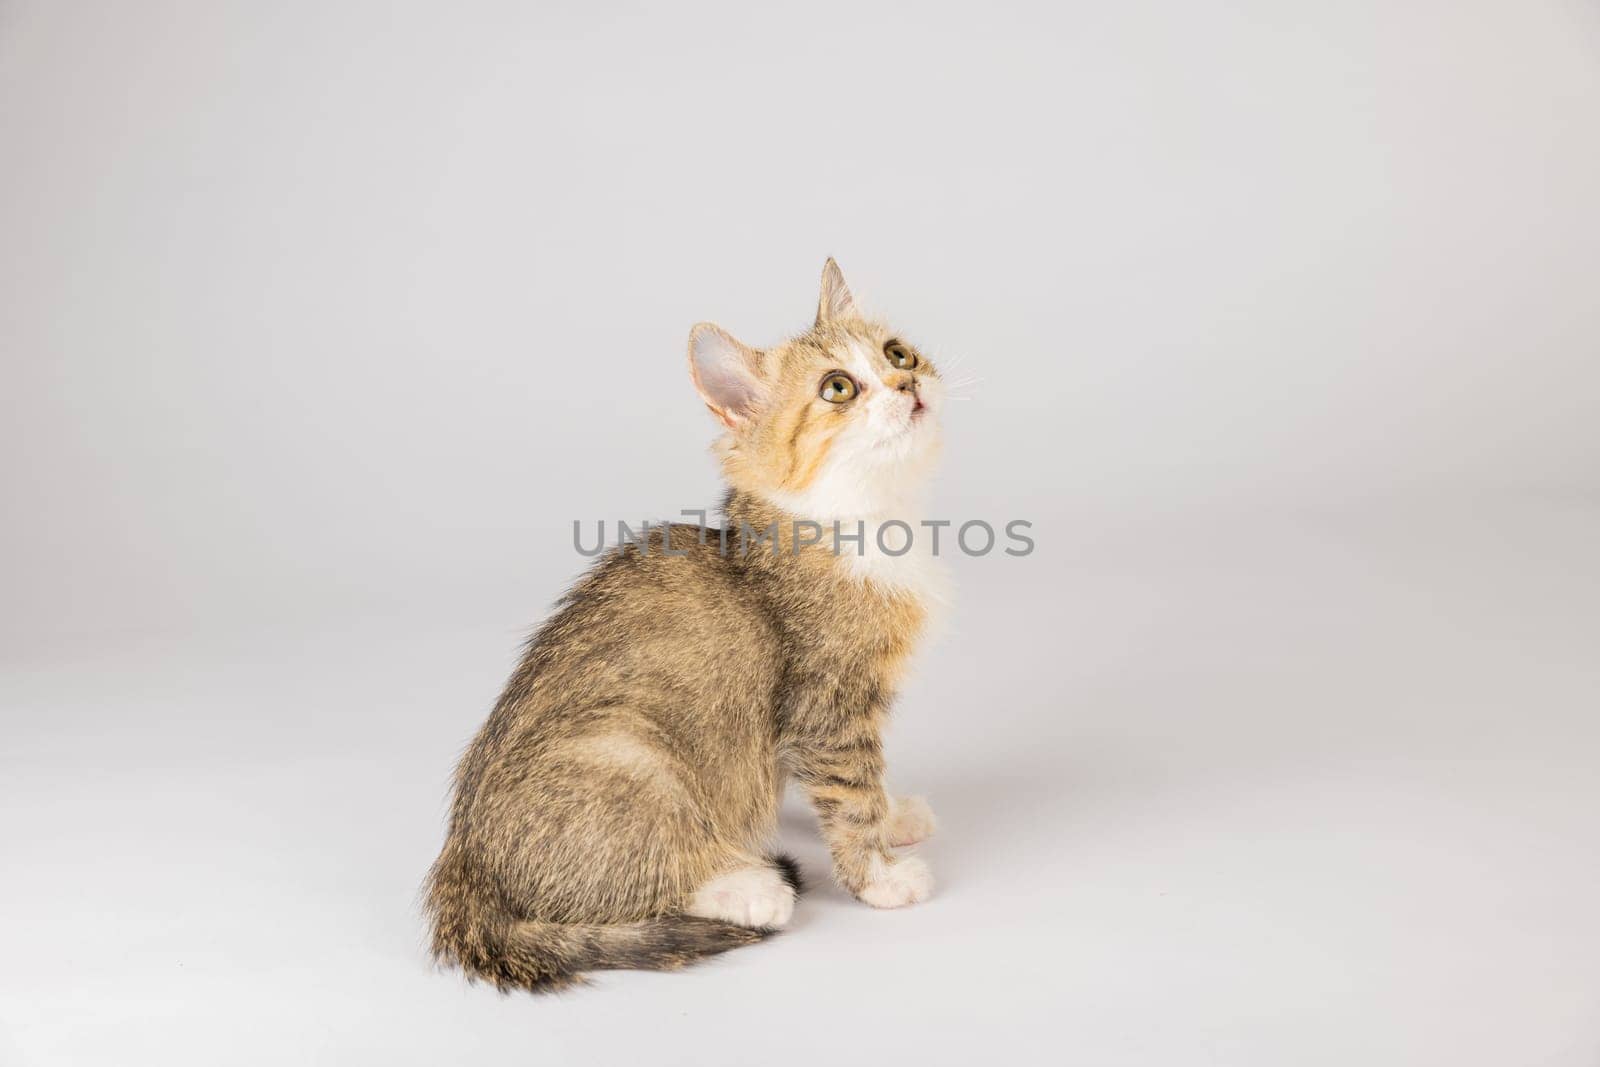 A beautiful little grey Scottish Fold cat stands, looking playful and cheerful in this isolated cat portrait on a white background. by Sorapop